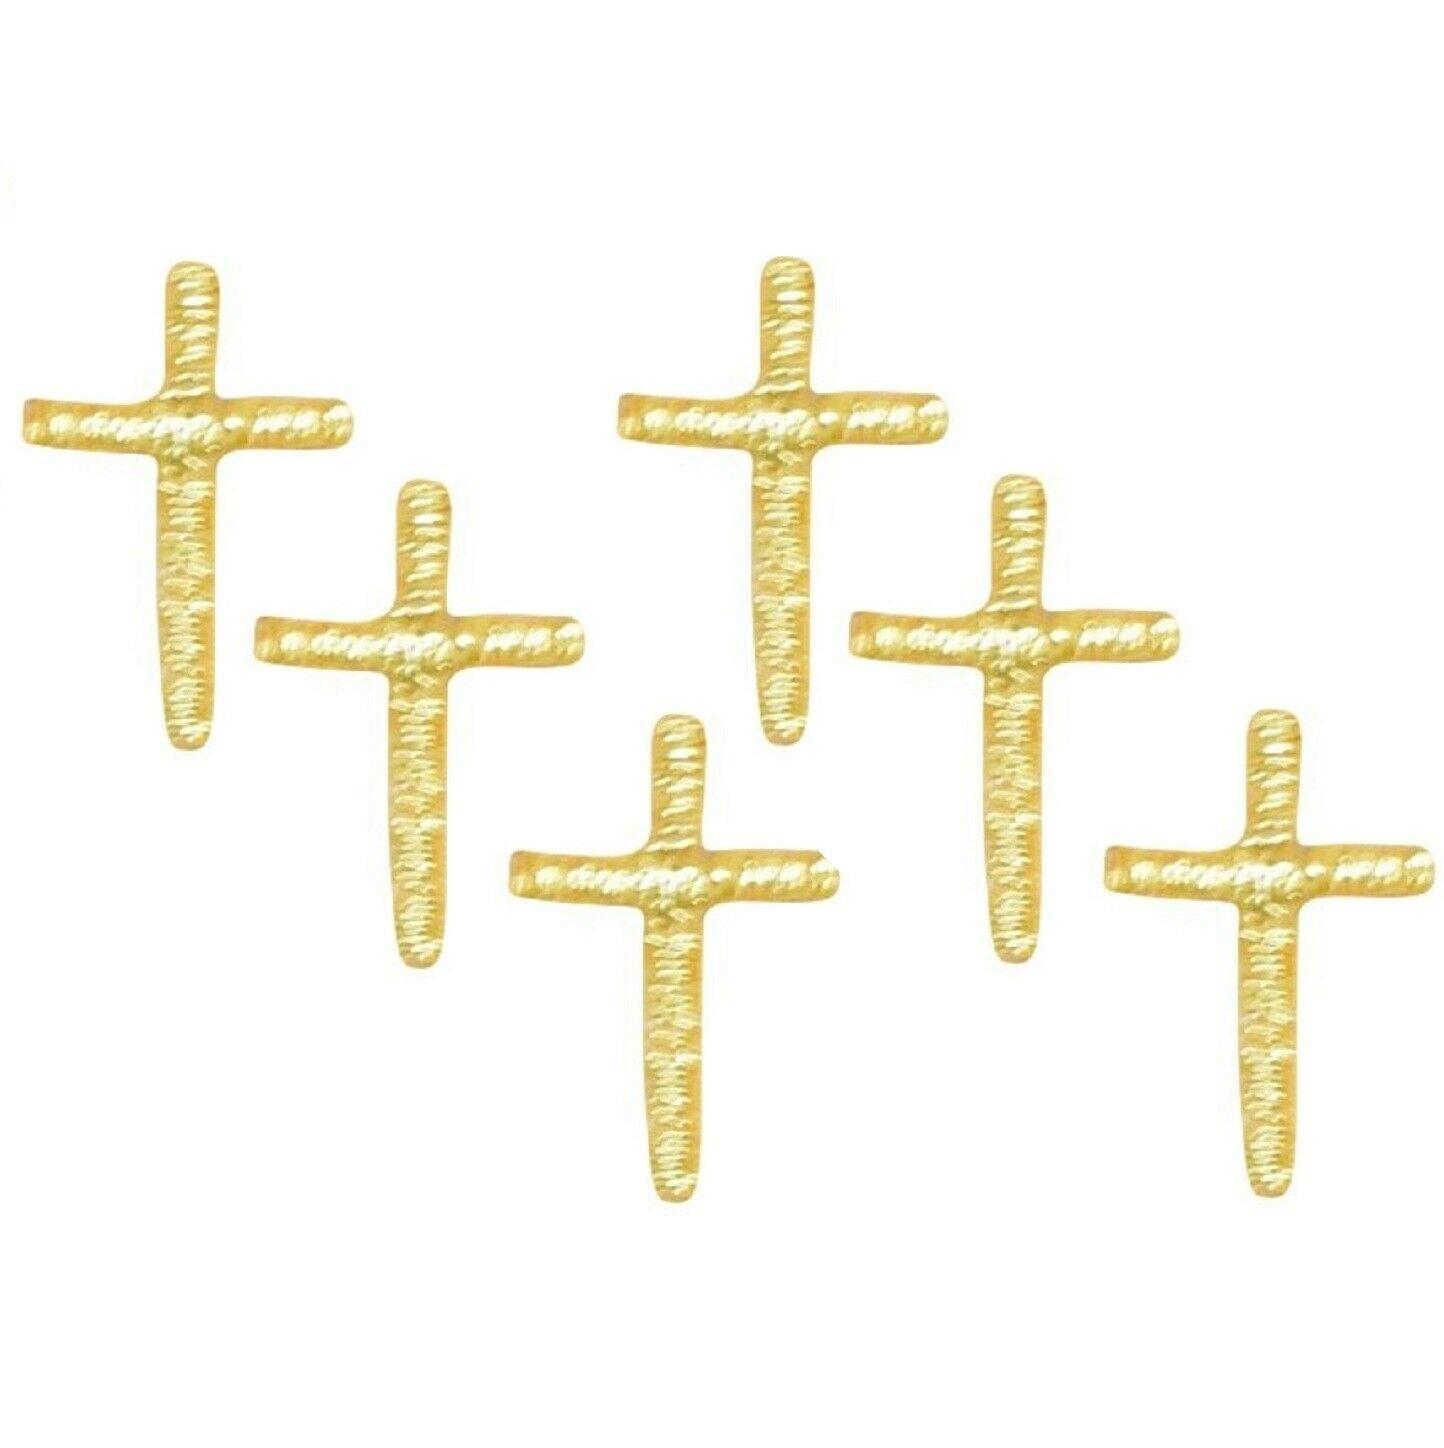 Mini Cross Applique Patch - Gold, Jesus, Christian Badge 1/2 (6-Pack, Iron on)